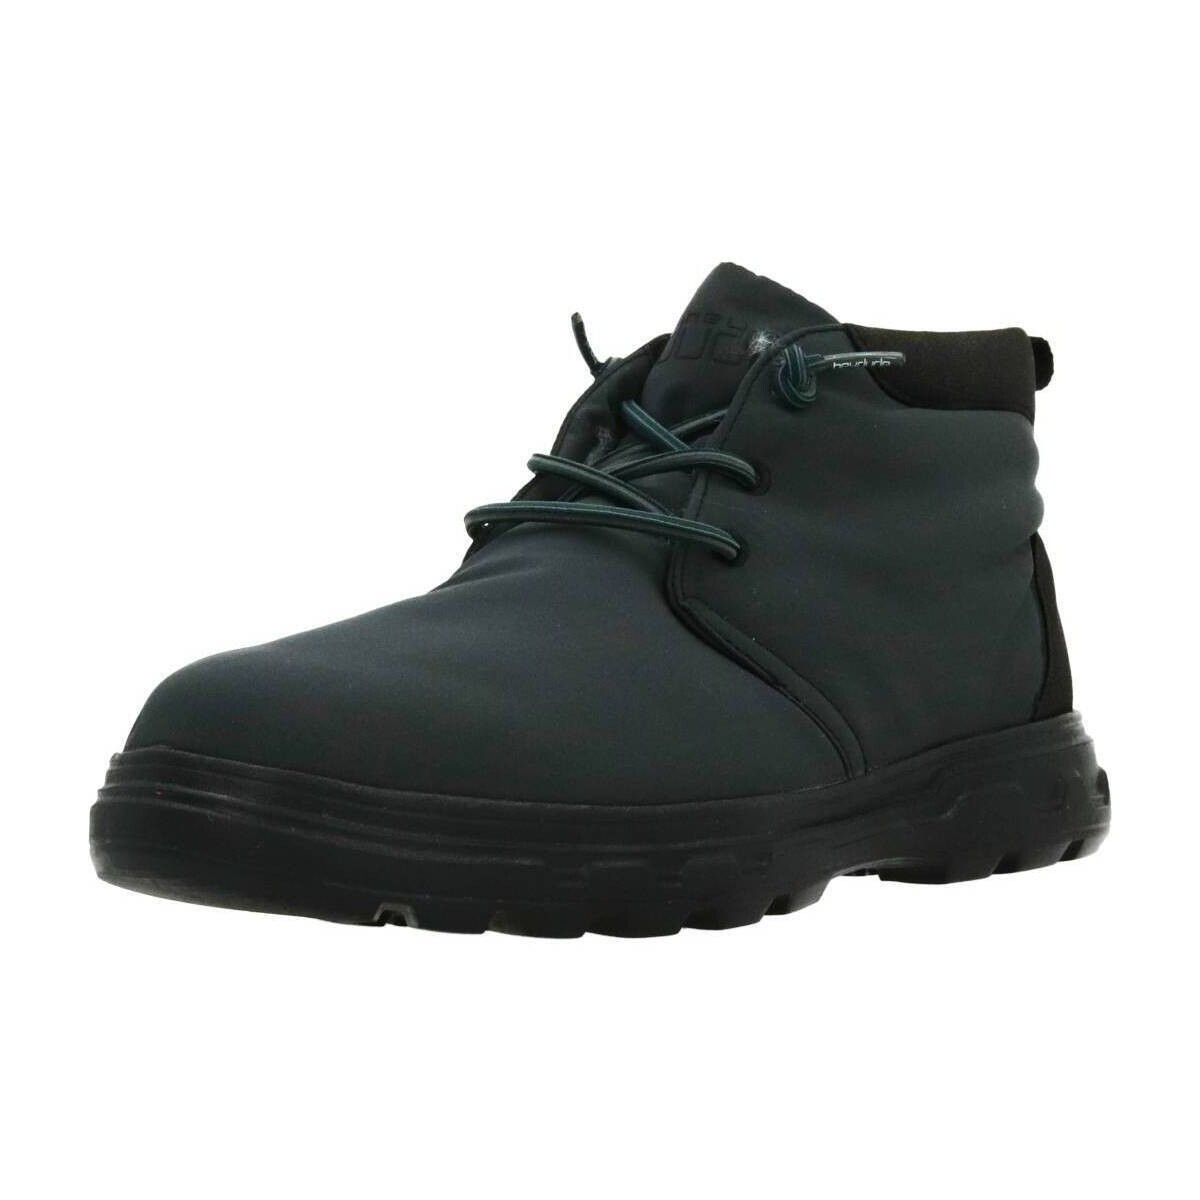 Chaussures Homme Bottes Hey Dude SPENCER ECO Gris